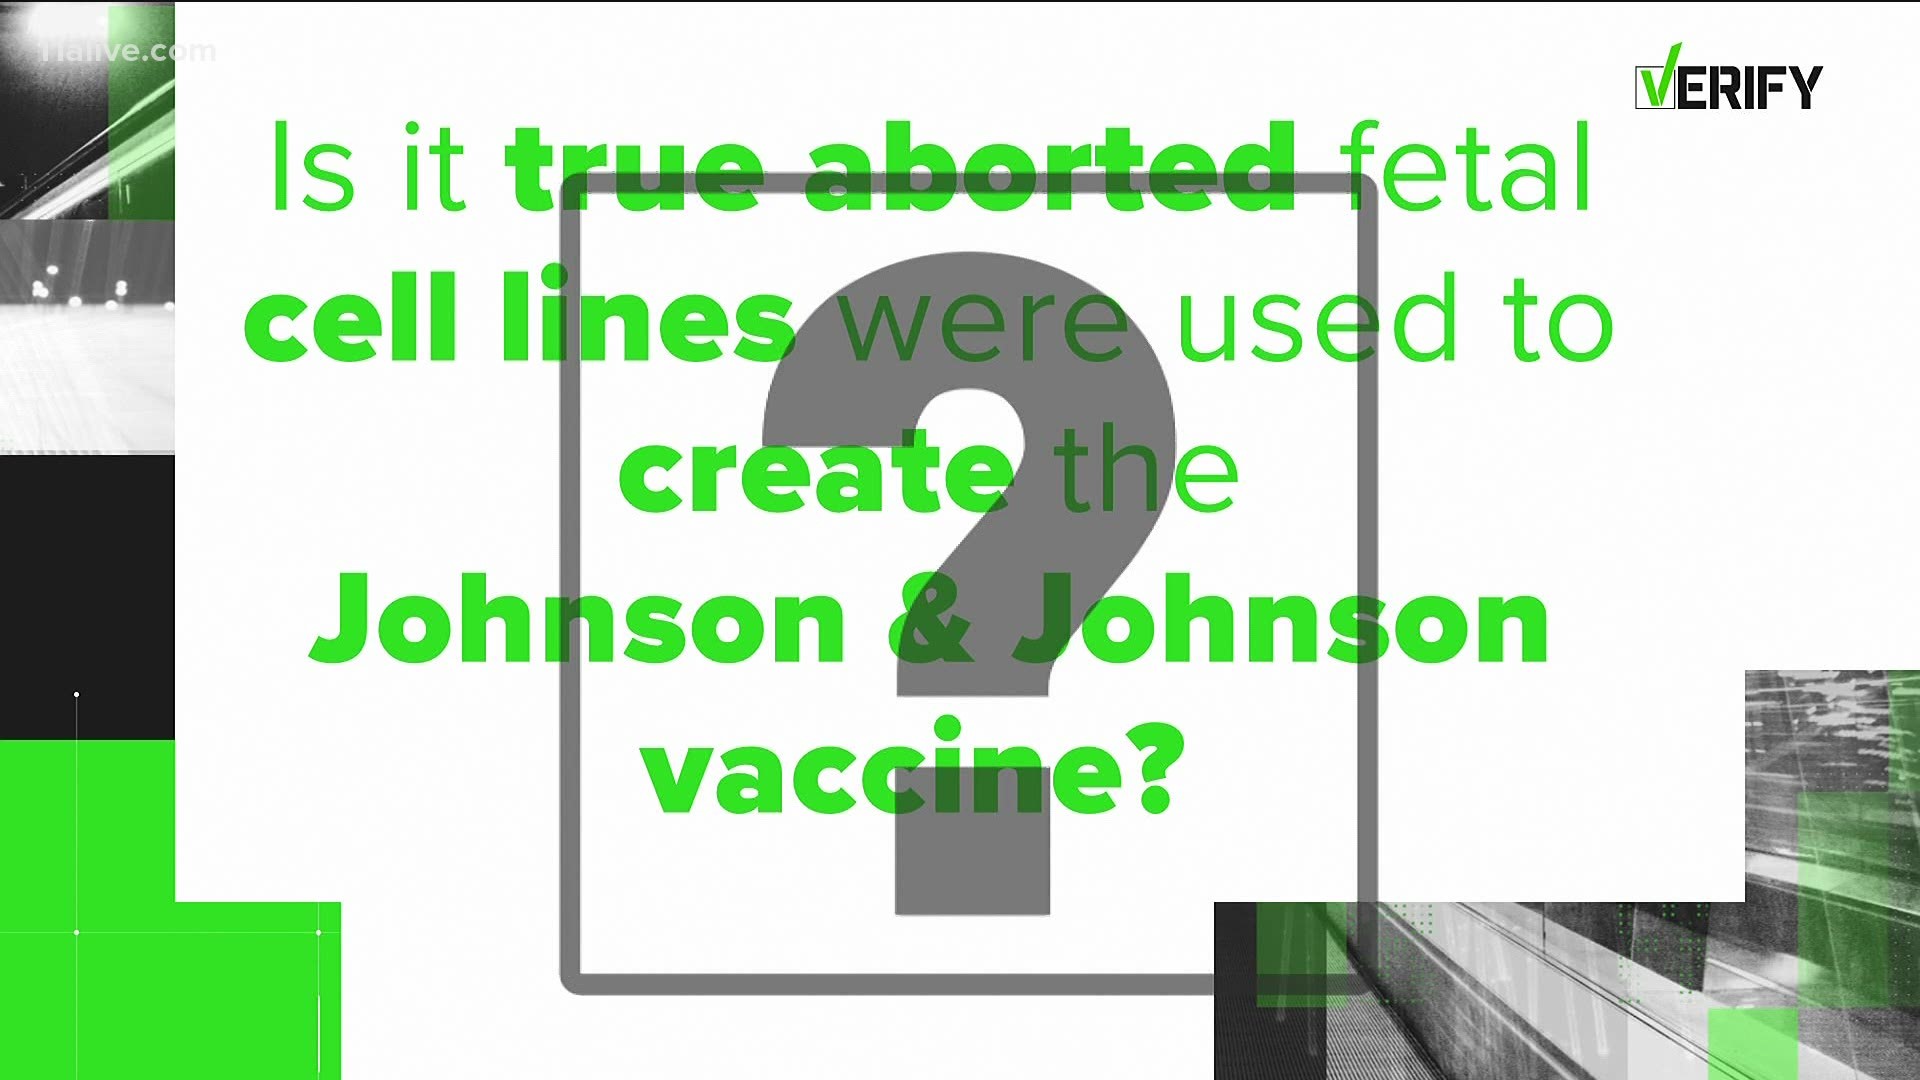 Dozens of viewers have asked our VERIFY team about aborted fetal cells in the Johnson & Johnson COVID-19 vaccine. So, we looked into it.